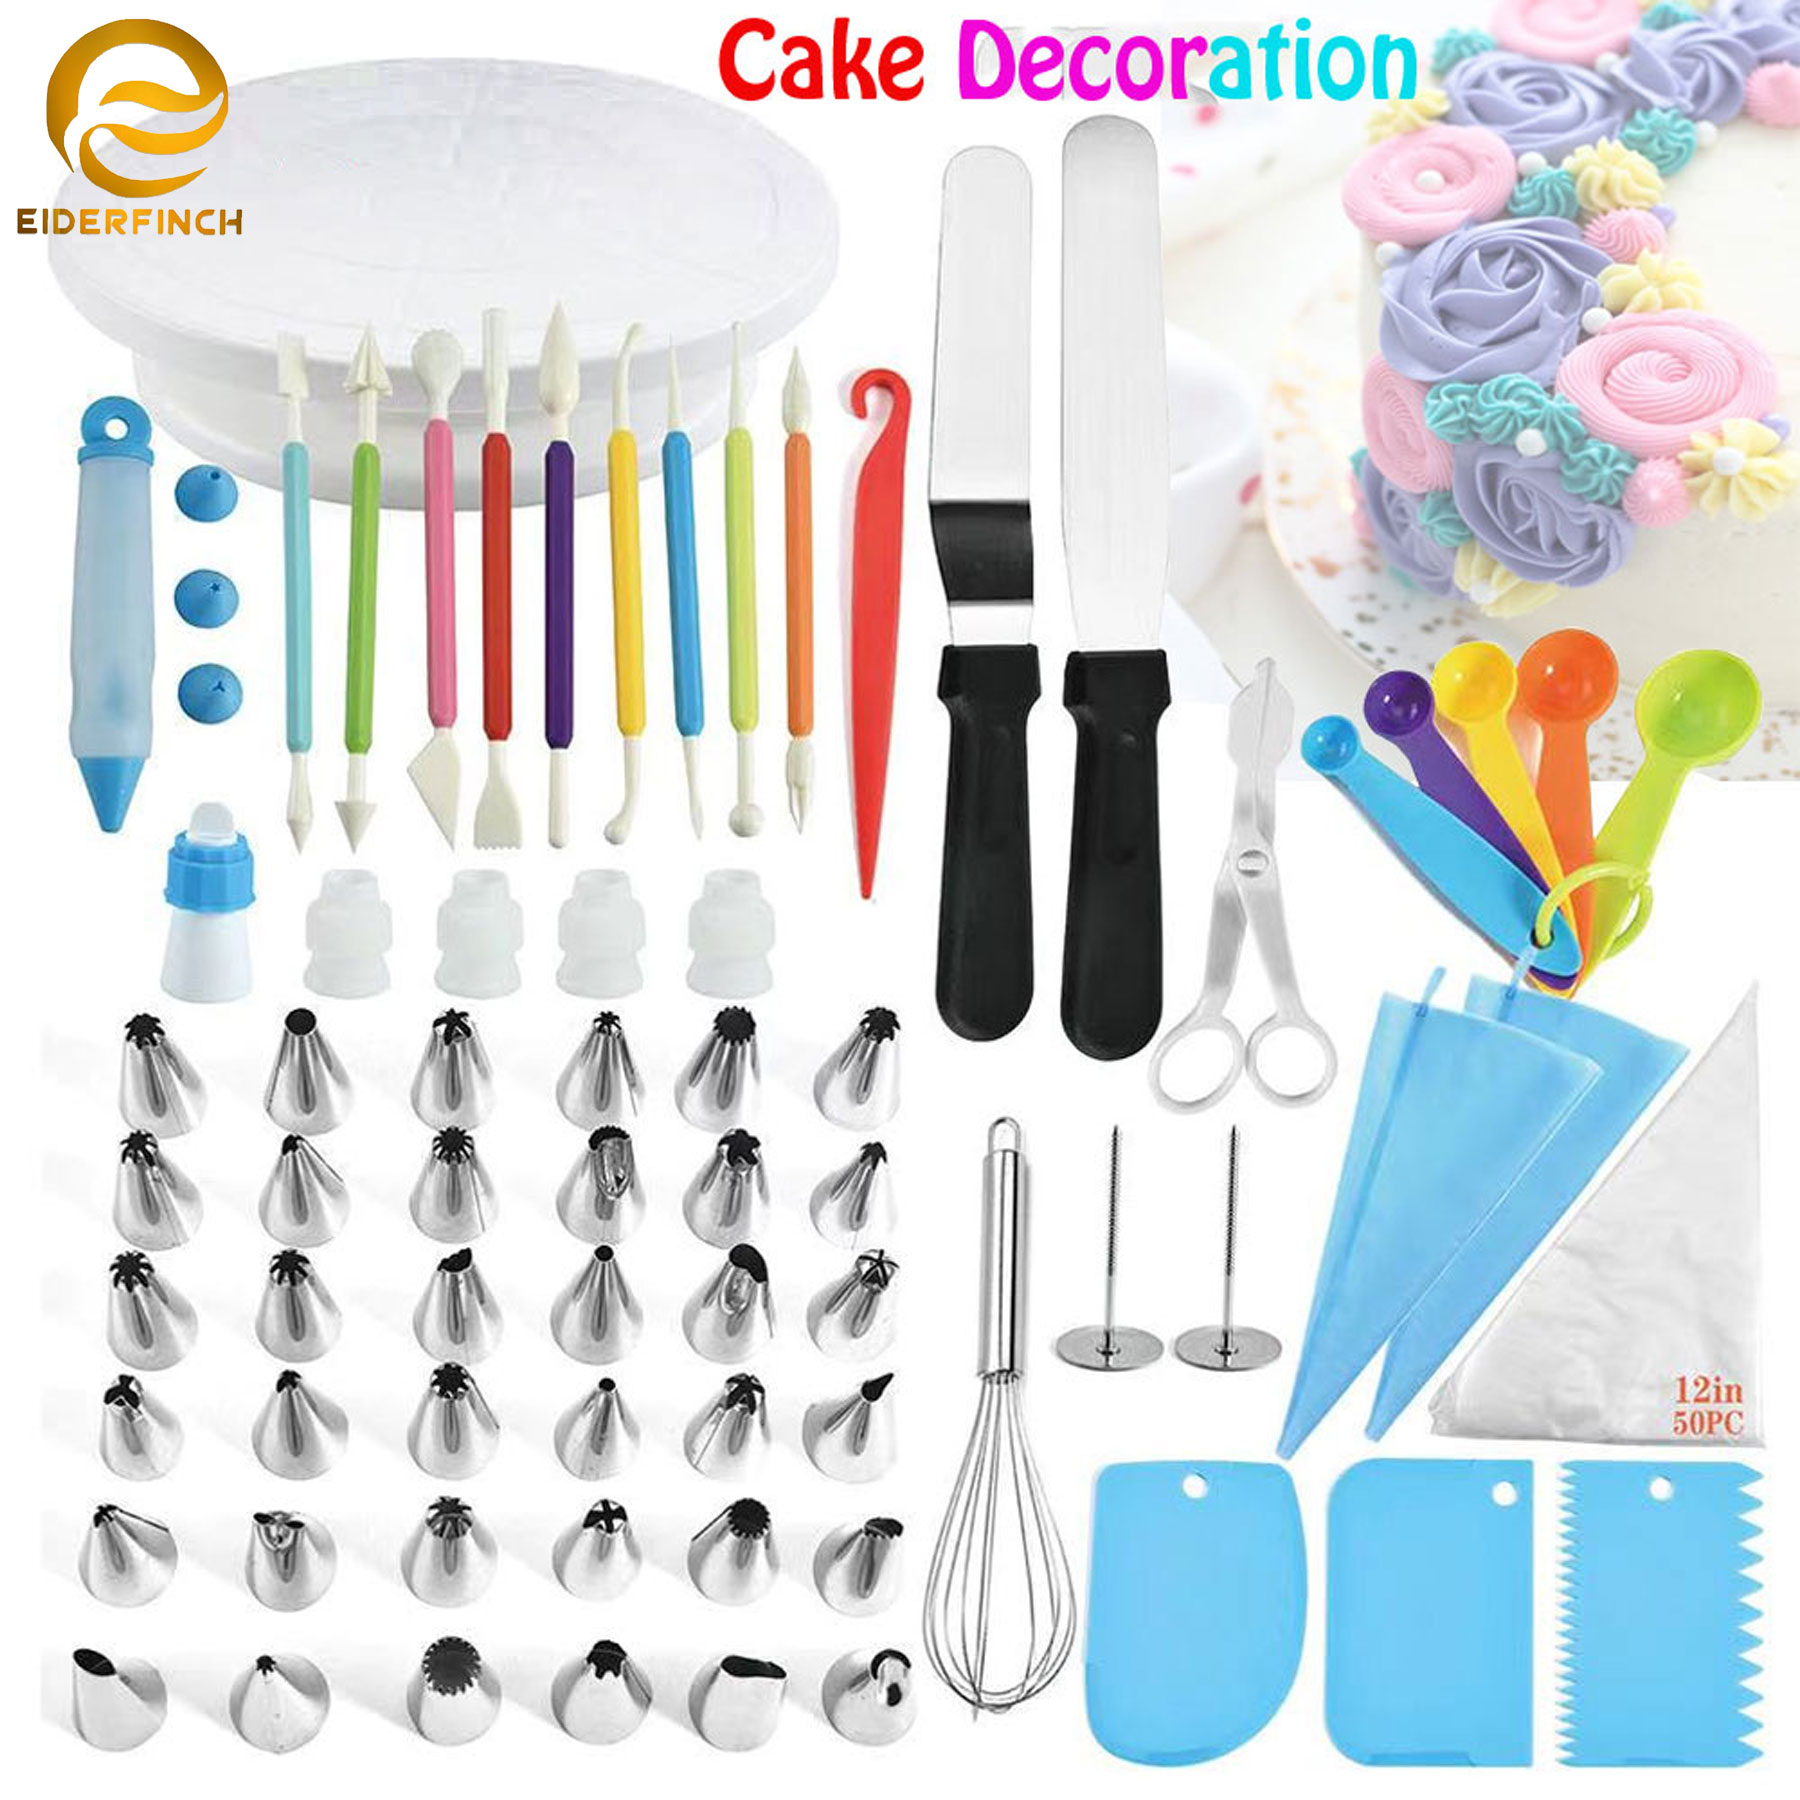 Cake Decorating Tools: Types and Benefits - HICAPS Mktg. Corp.